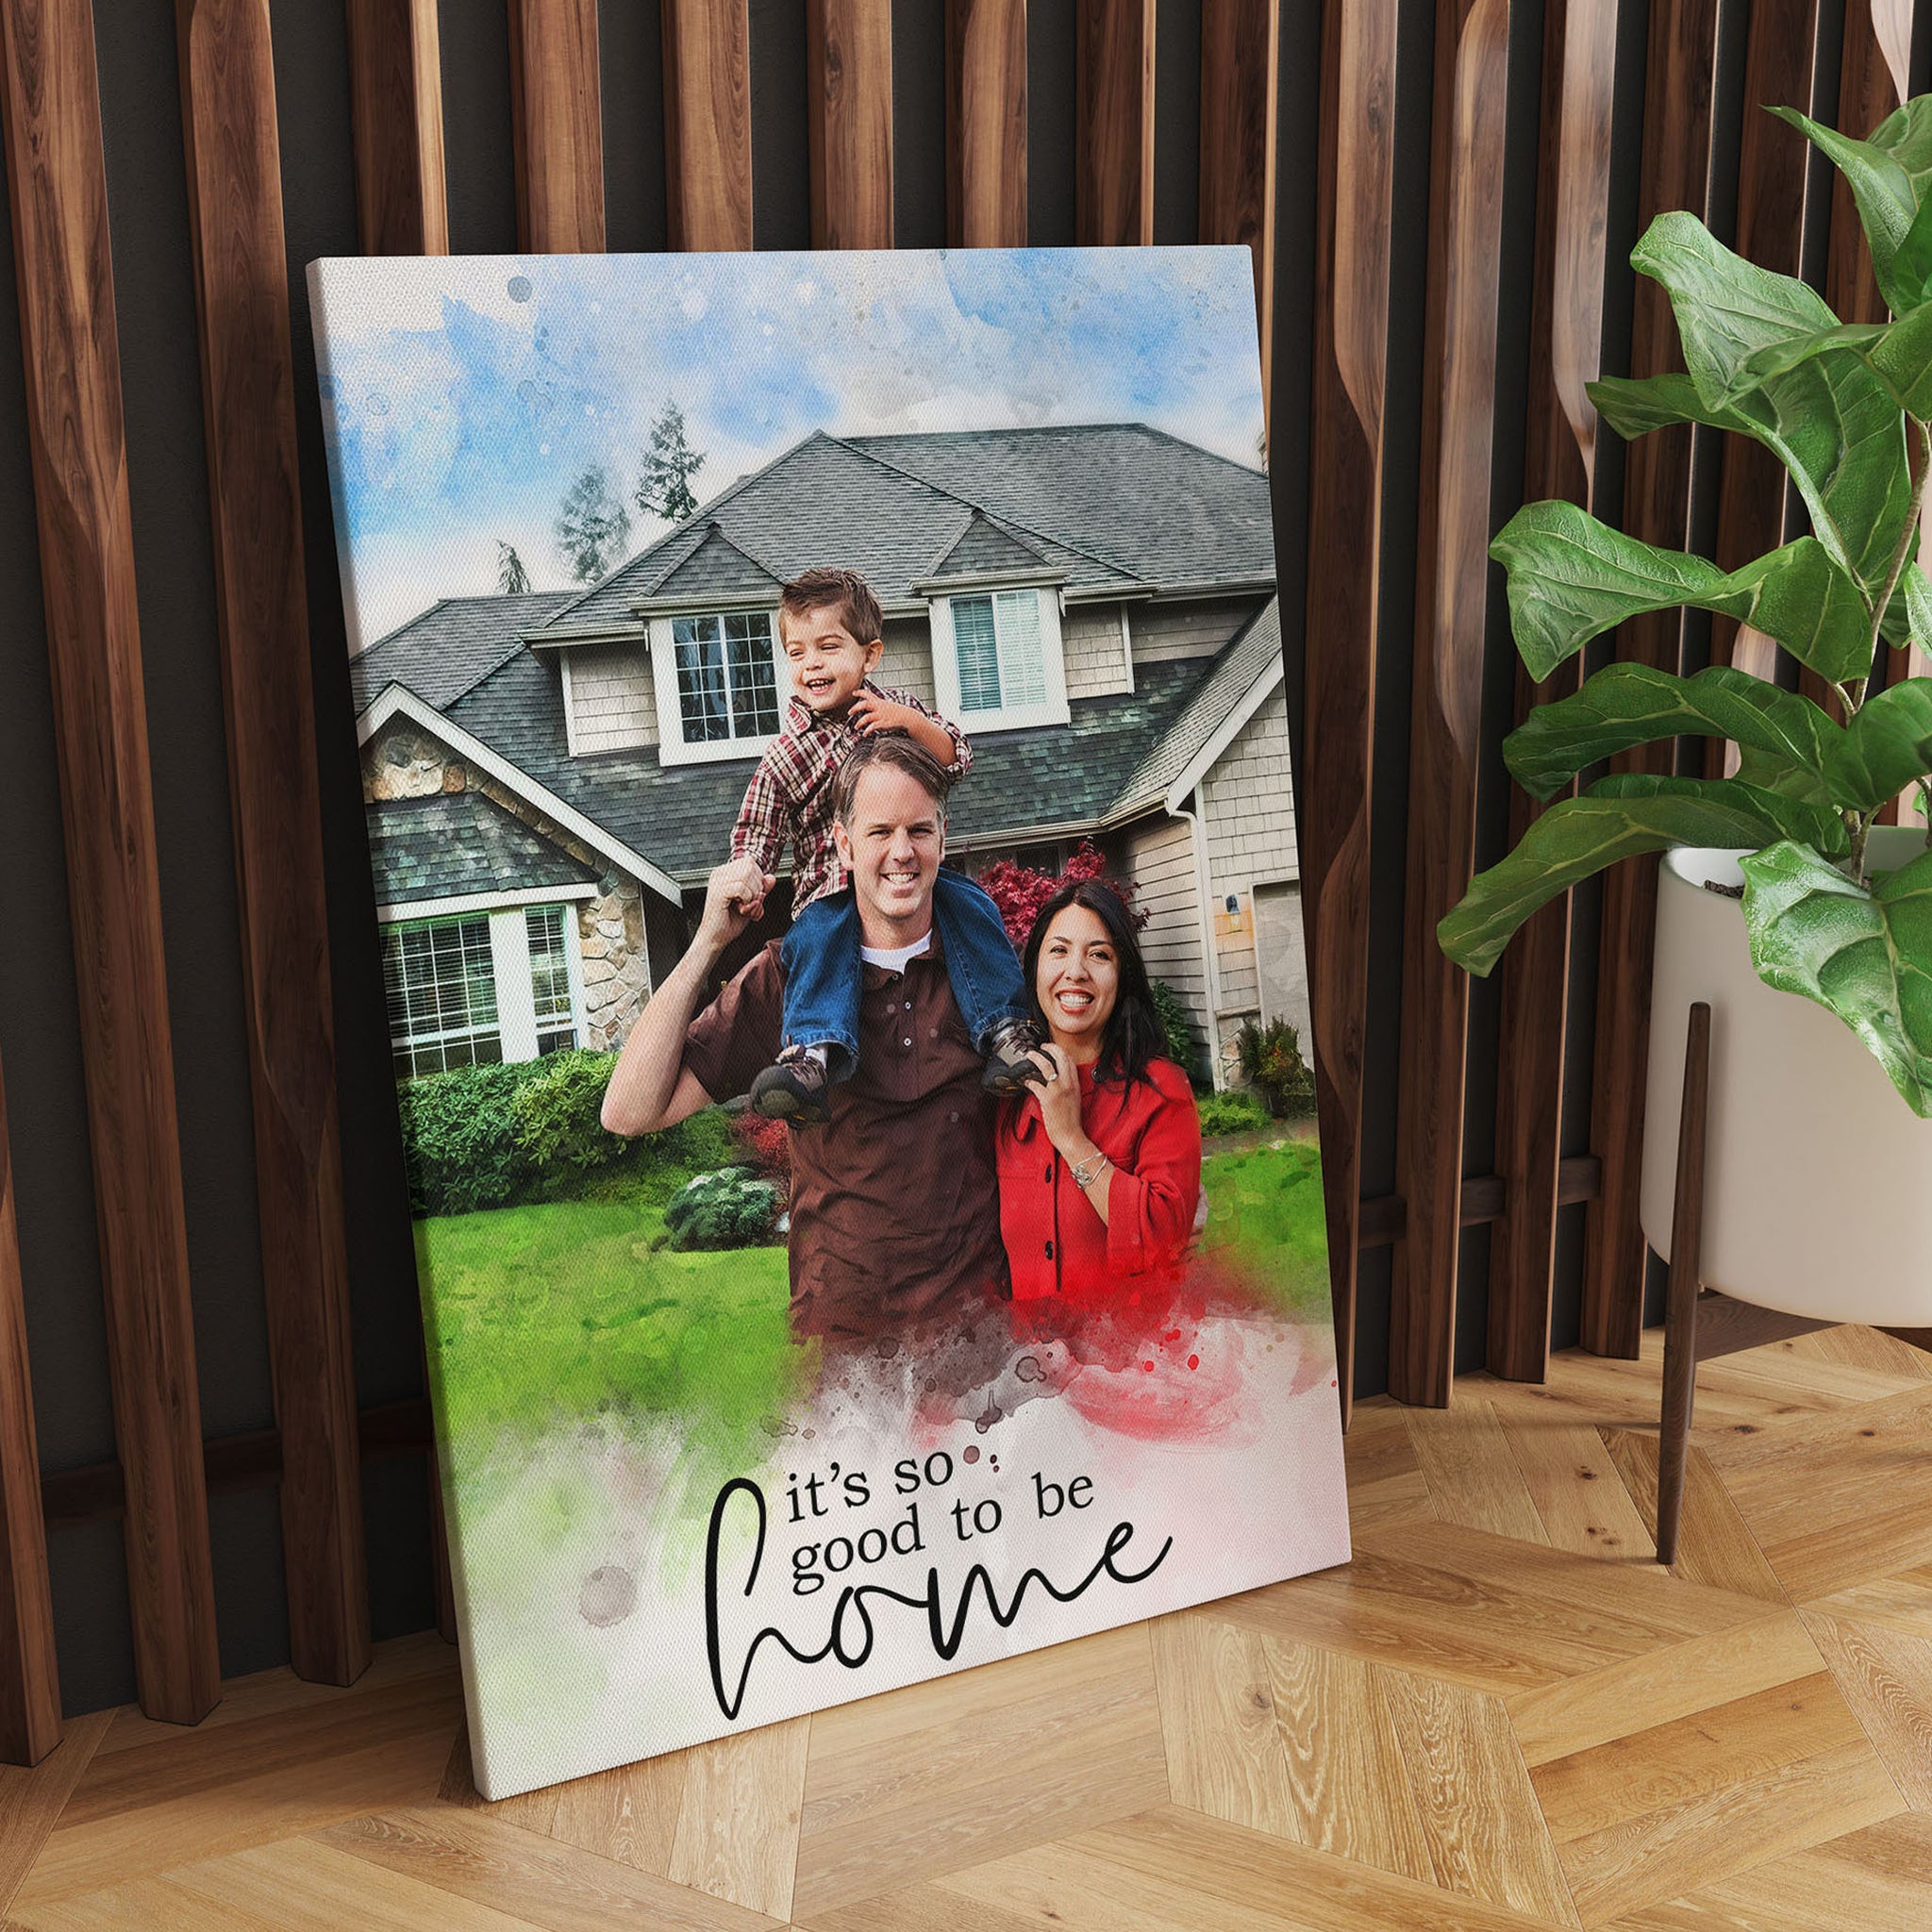 Gift for New Homeowners | Realtor Closing Gifts | Home Warming Gift Ideas | Custom House Portraits | Real Estate Agents - FromPicToArt